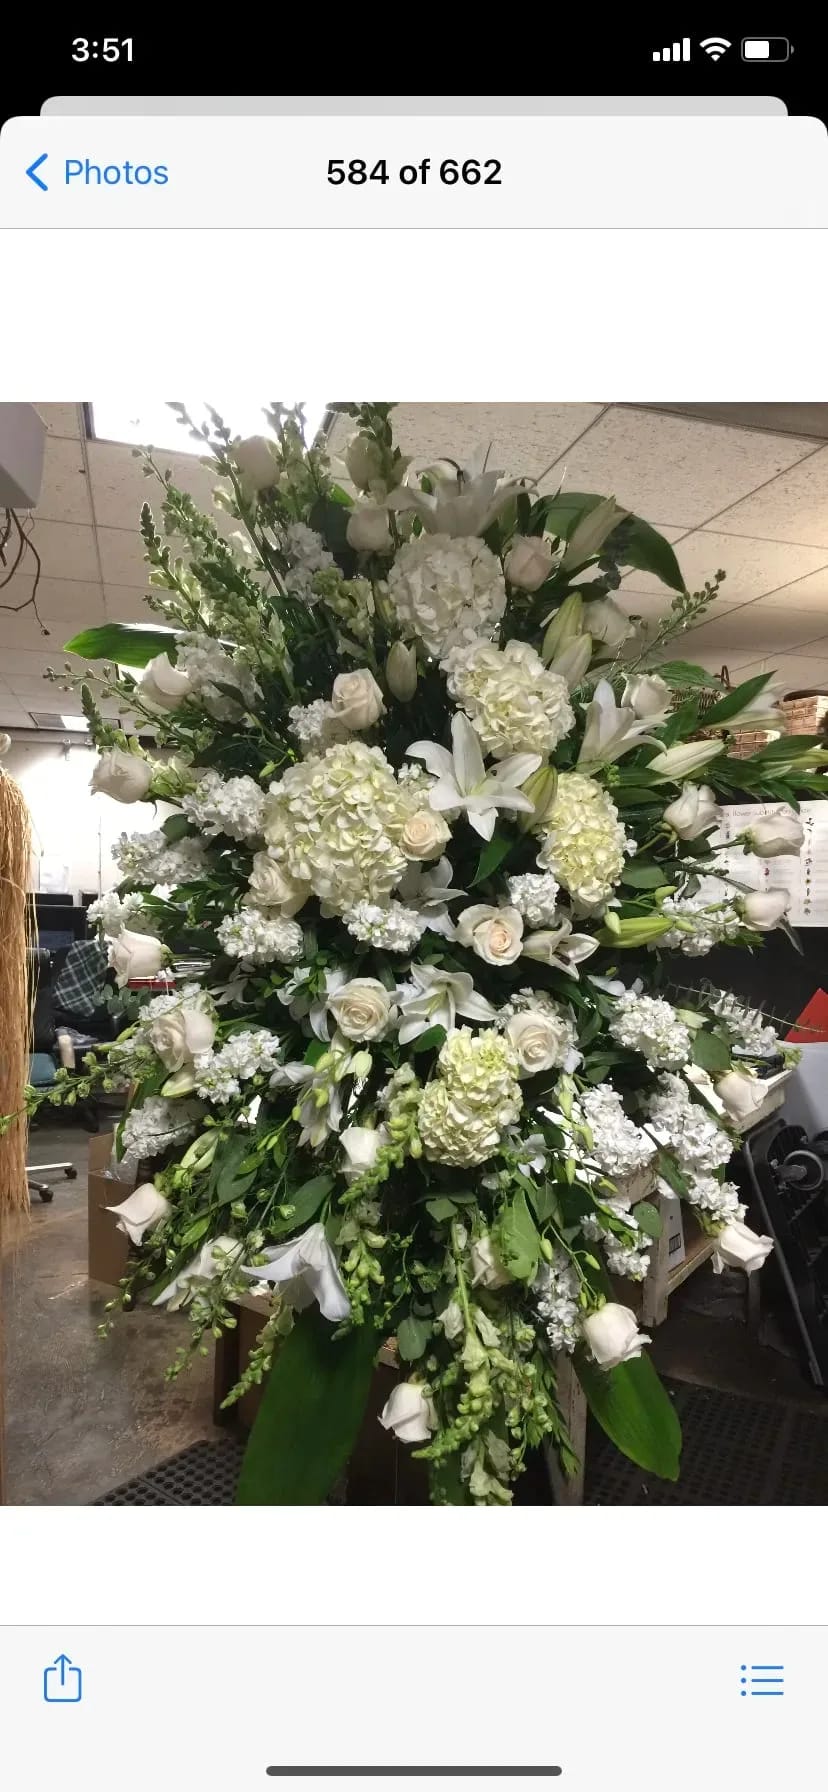 Tall standing spray of Roses, lilies, hydrangea, and premium white Flowers appropriate